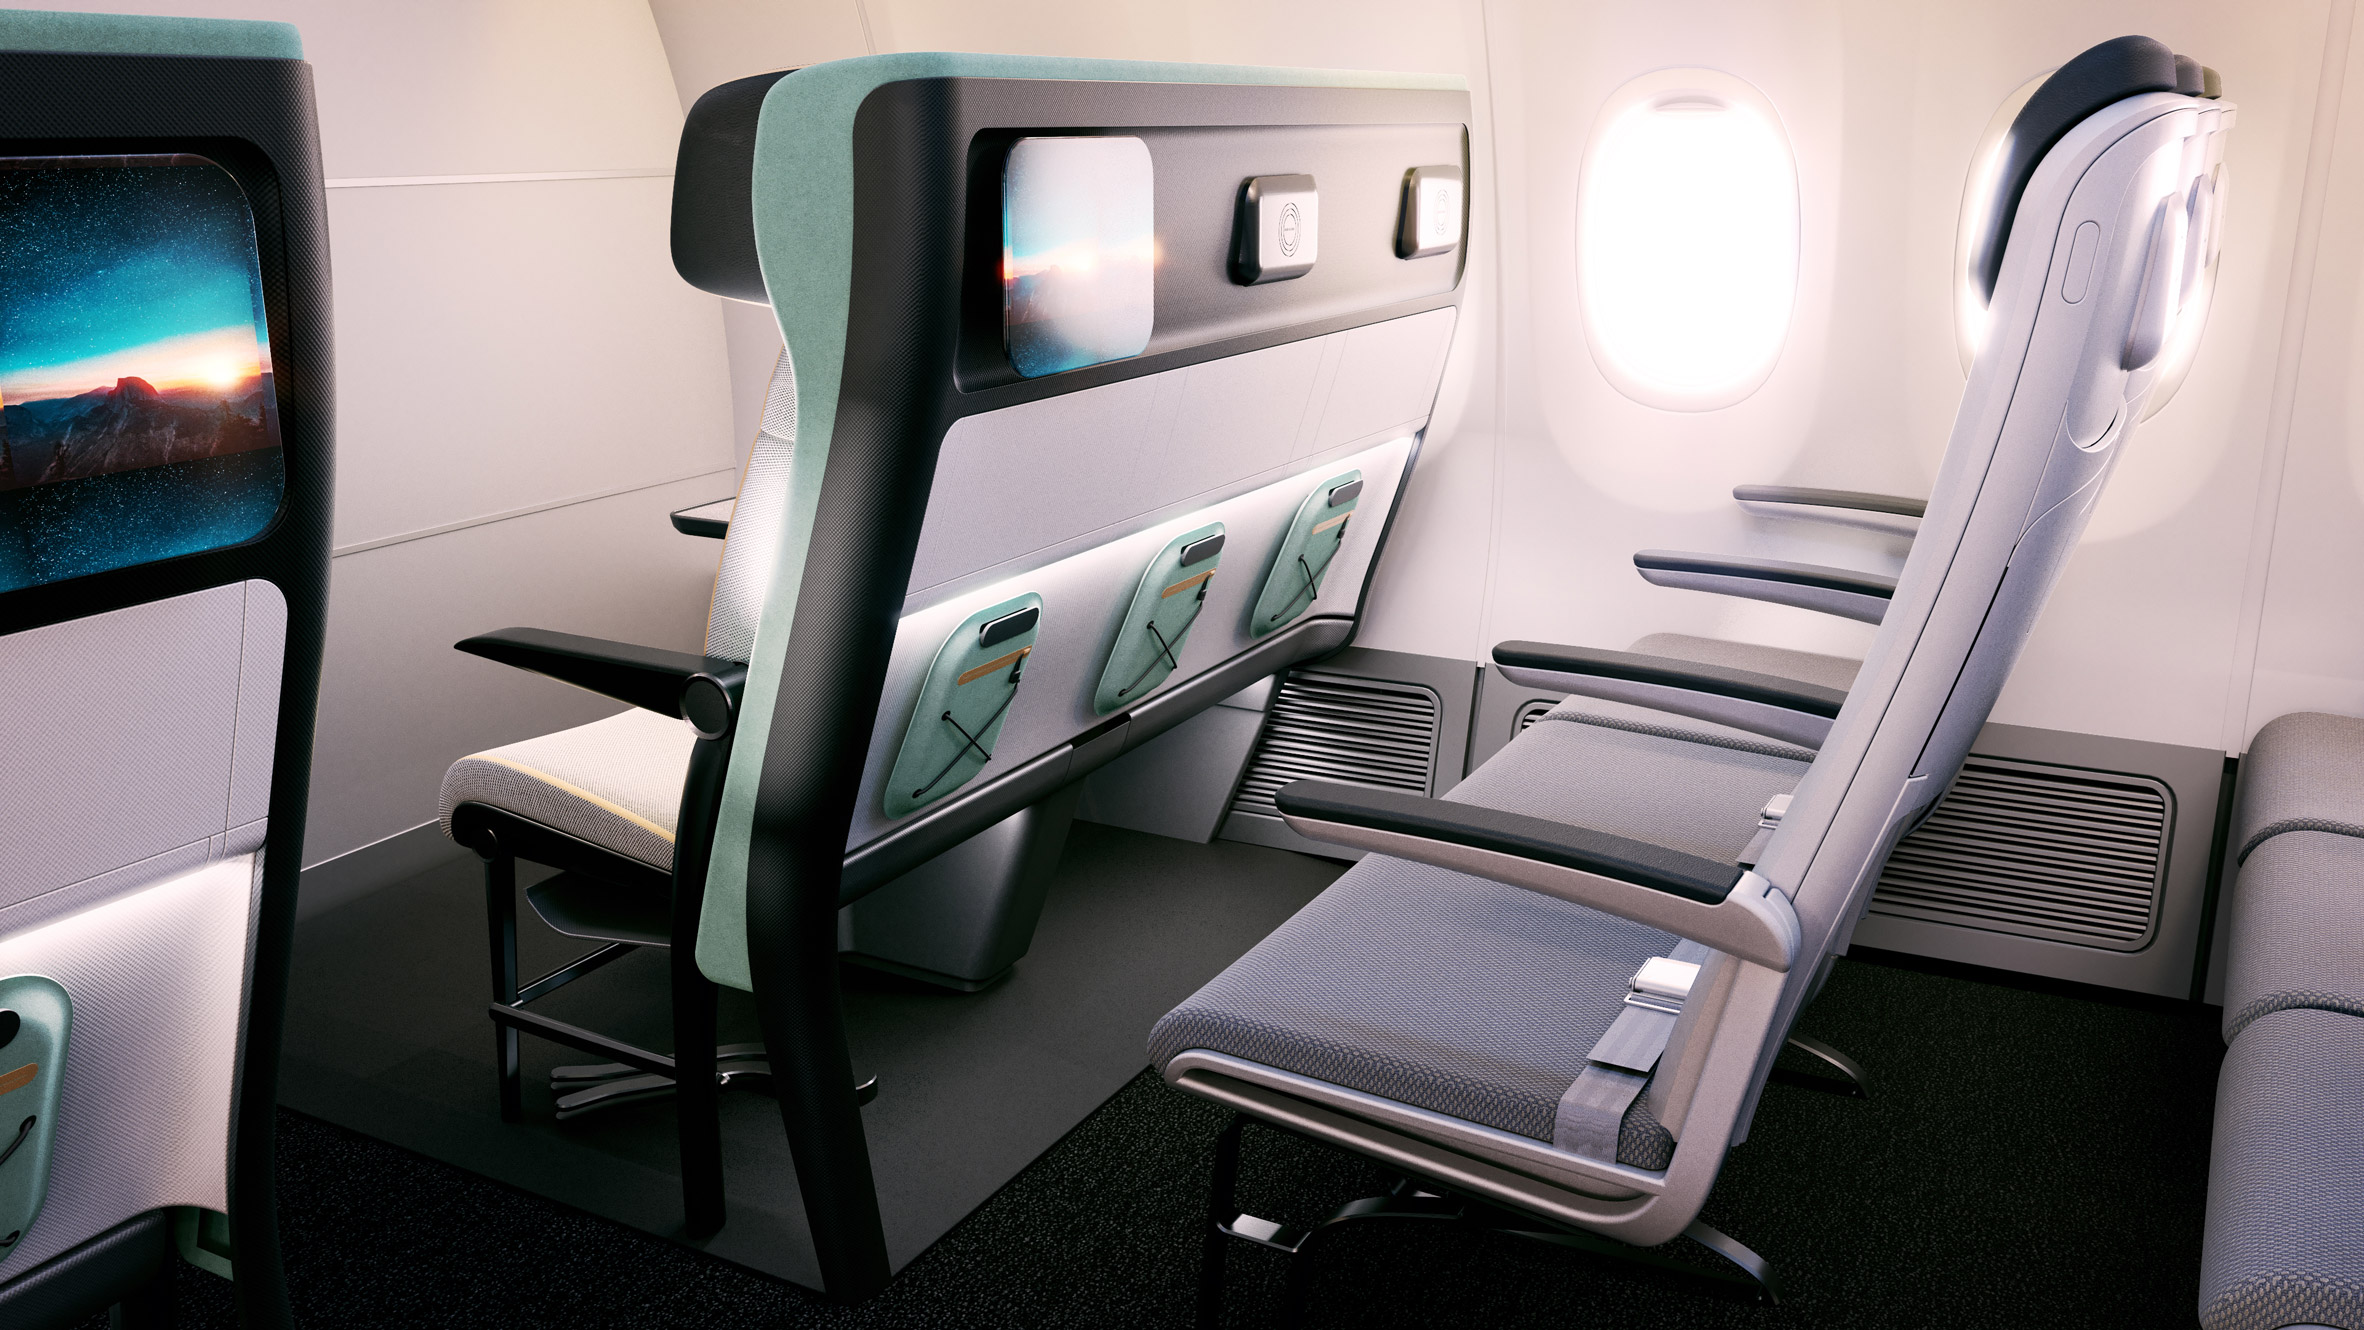 Air 4 All seating concept seen from behind with airline branding and accessories integrating with the cabin